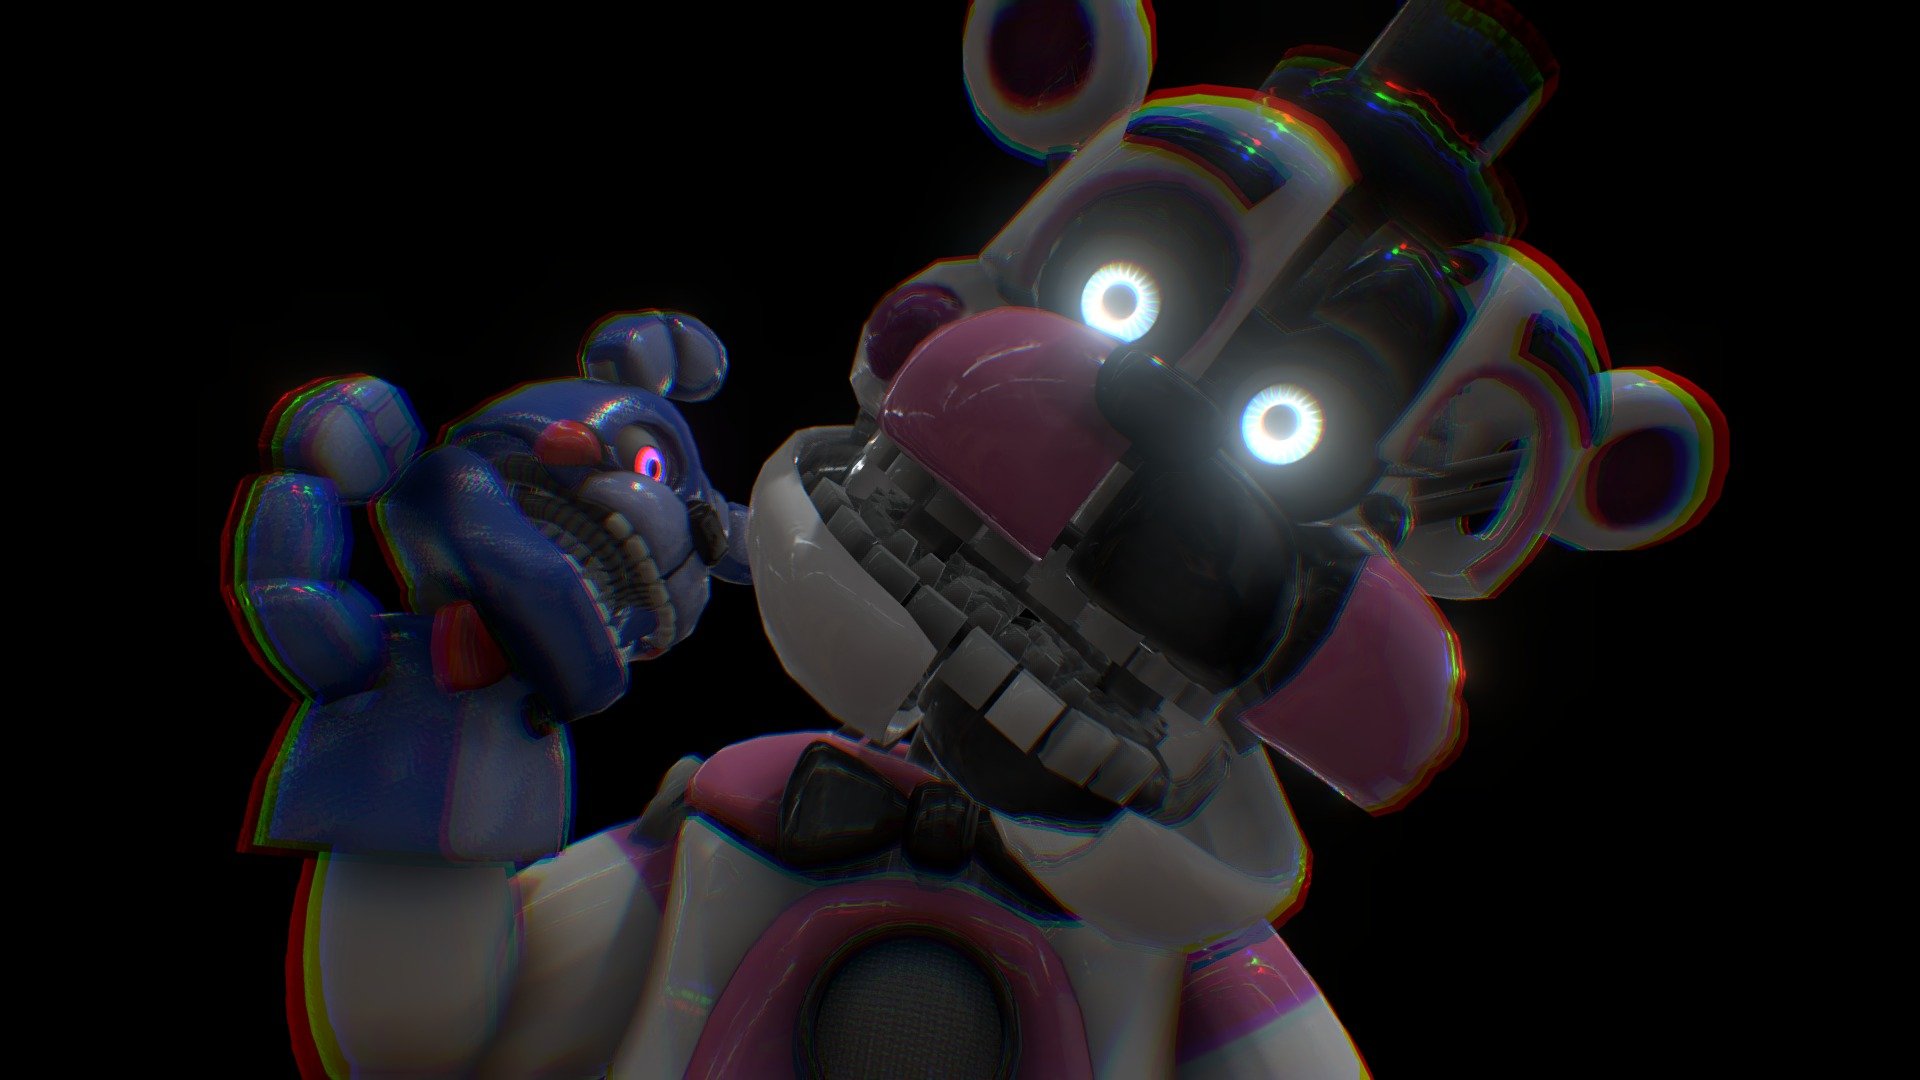 Shadow Freddy REACTS to Your FAN ART with Funtime Freddy 